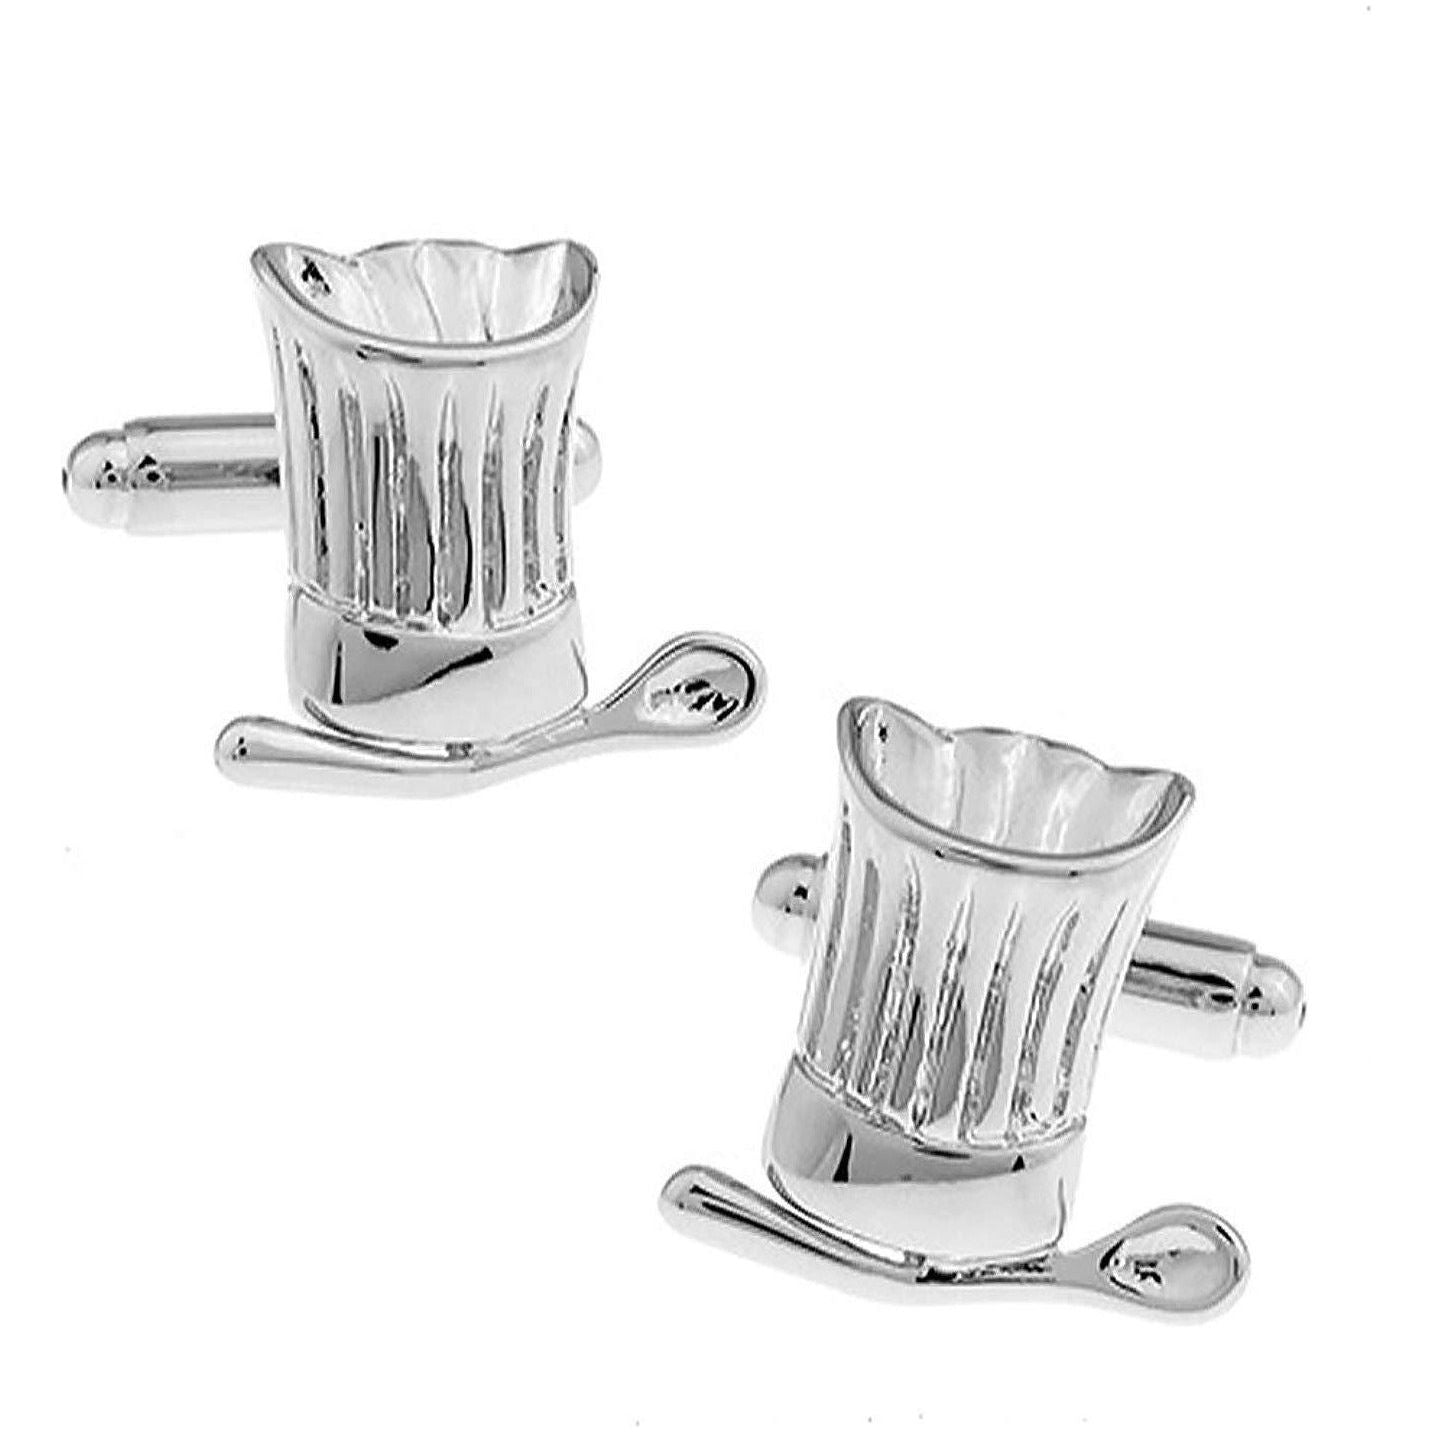 Chef's Hat and Ladle Cufflinks - Ashton and Finch